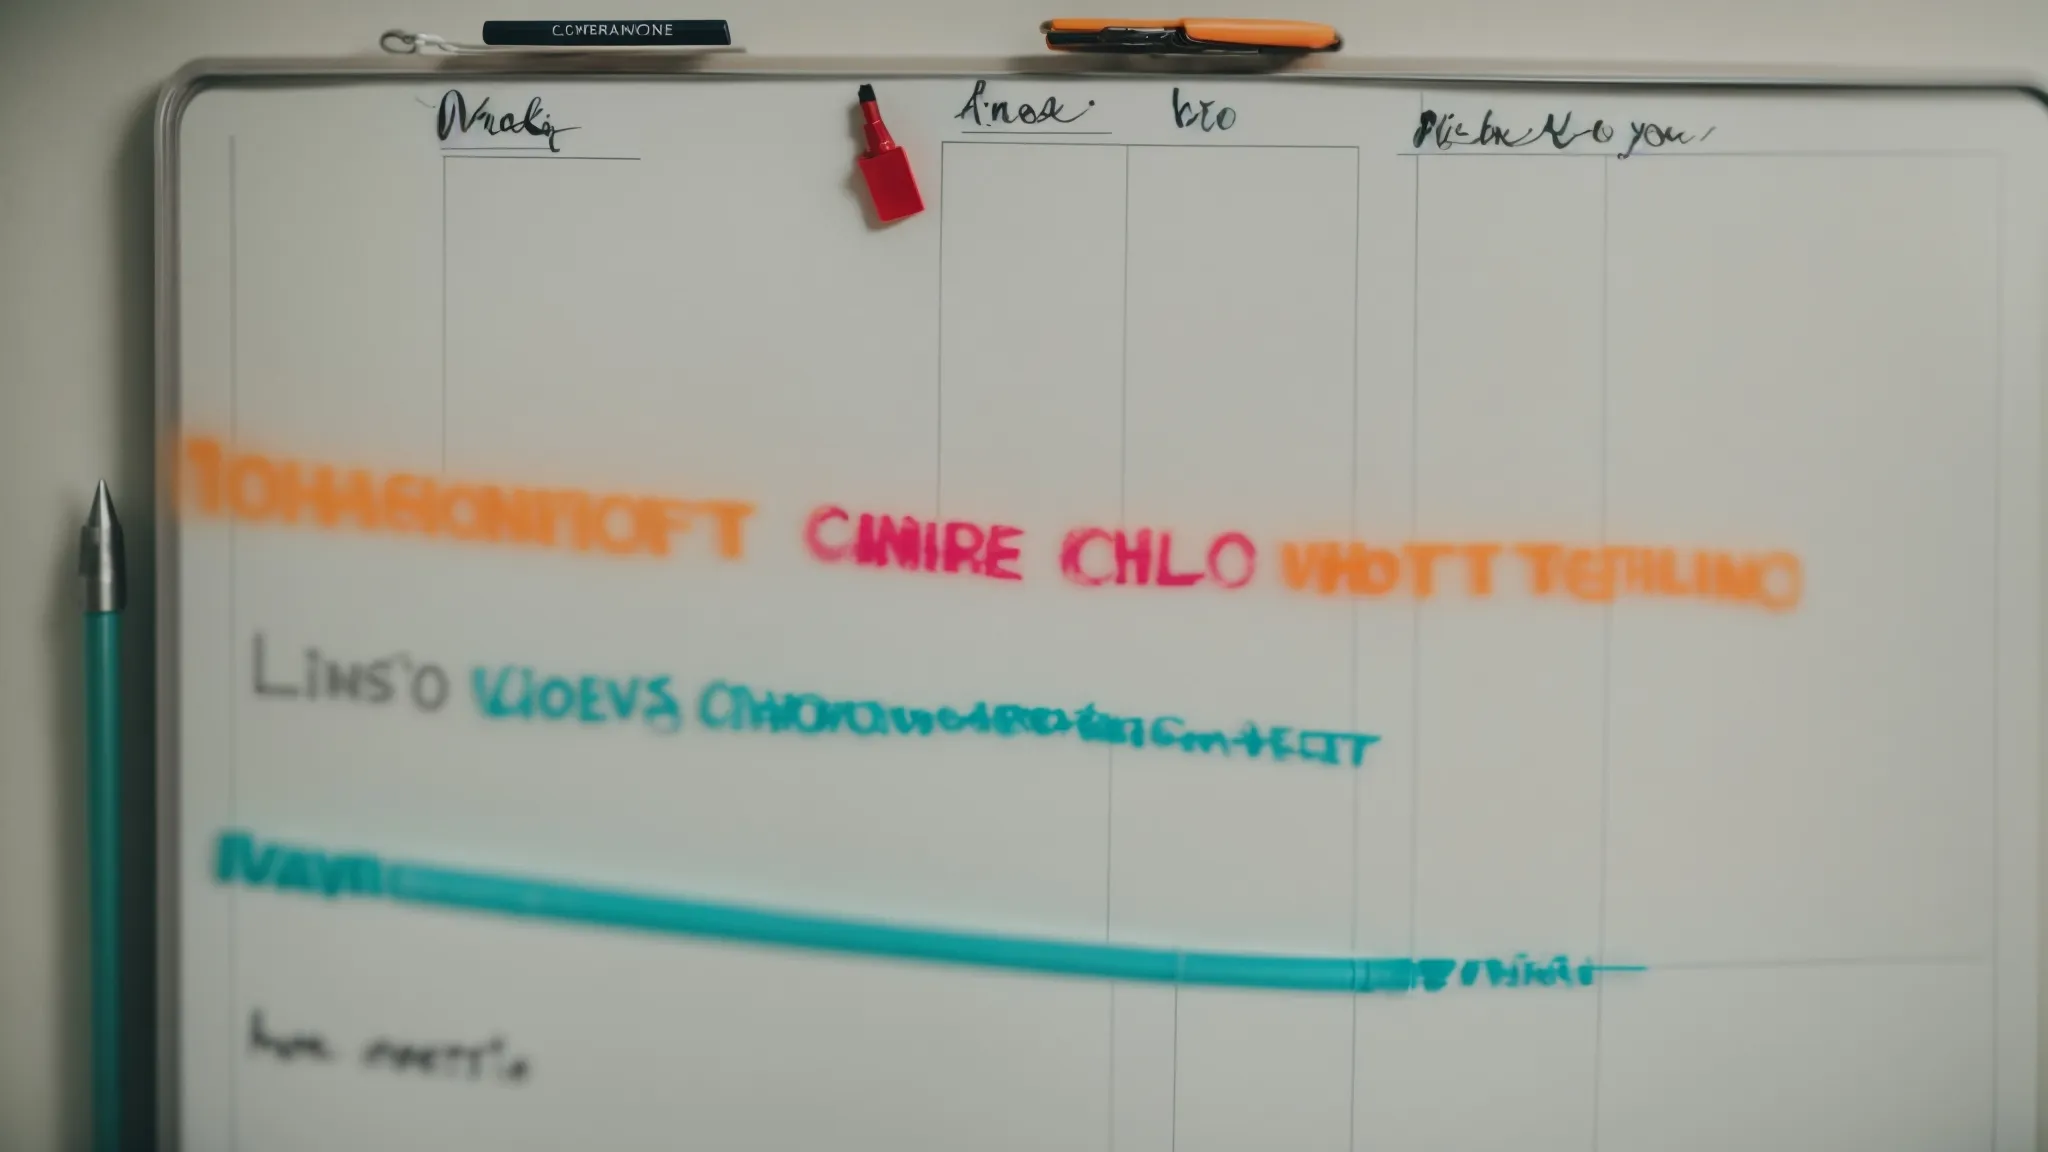 a to-do list appears on a clear whiteboard with colorful marker checkboxes indicating completed tasks.